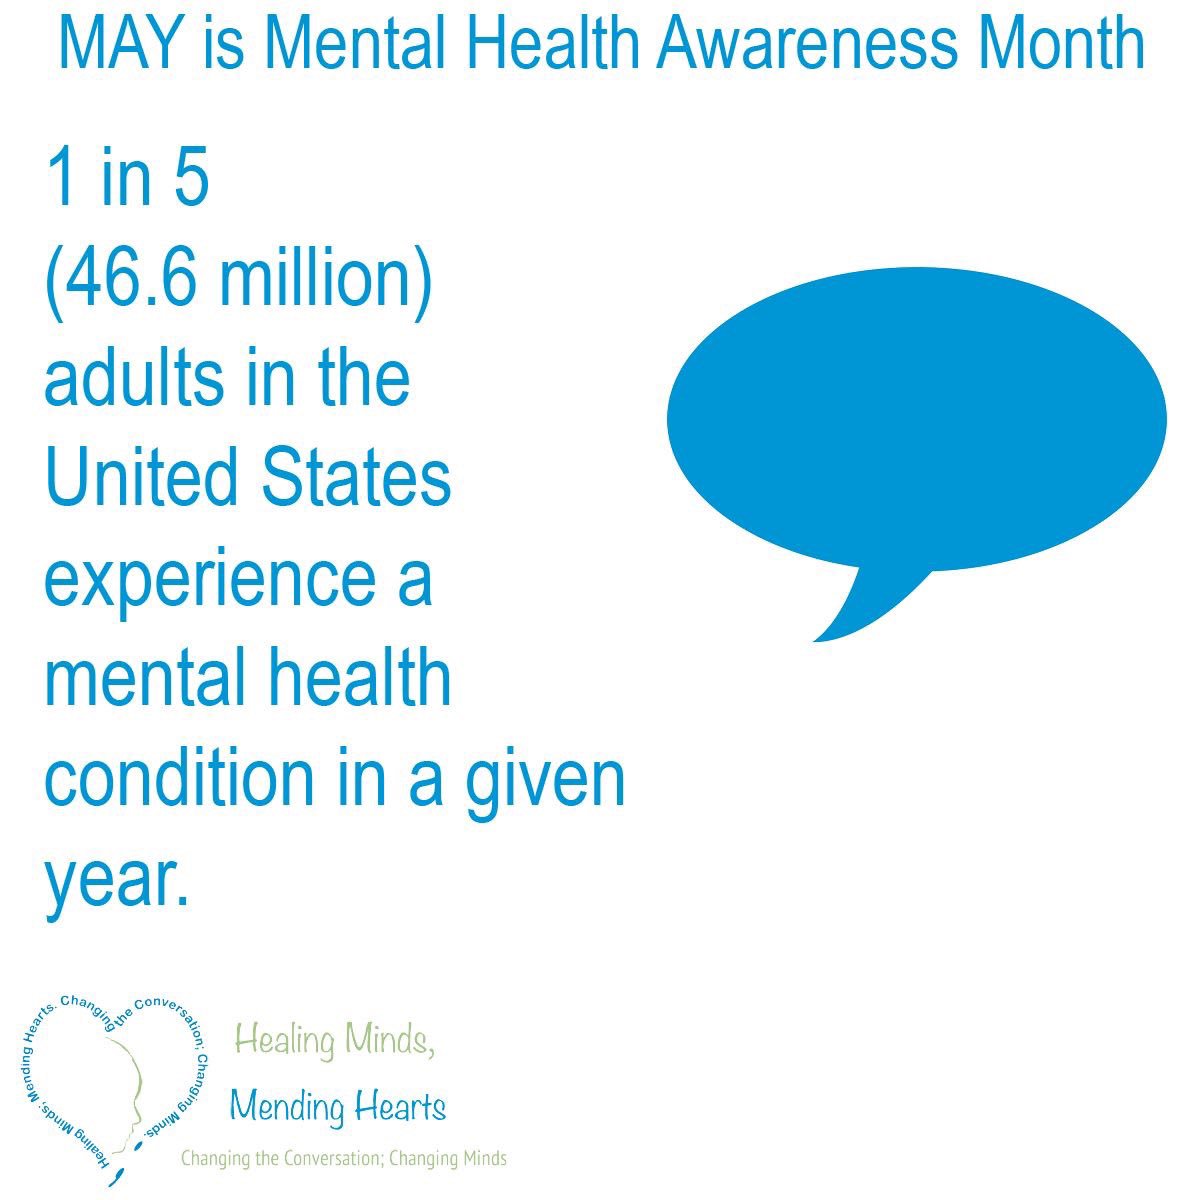 May is Mental Health Awareness Month.
1 in 5 (46.6 million) adults in the United States experience a mental health condition in a given year. #1In5Minds #Act4MentalHealth #StrongerThanTheStigma #MHM2019
#HealingMindsSA